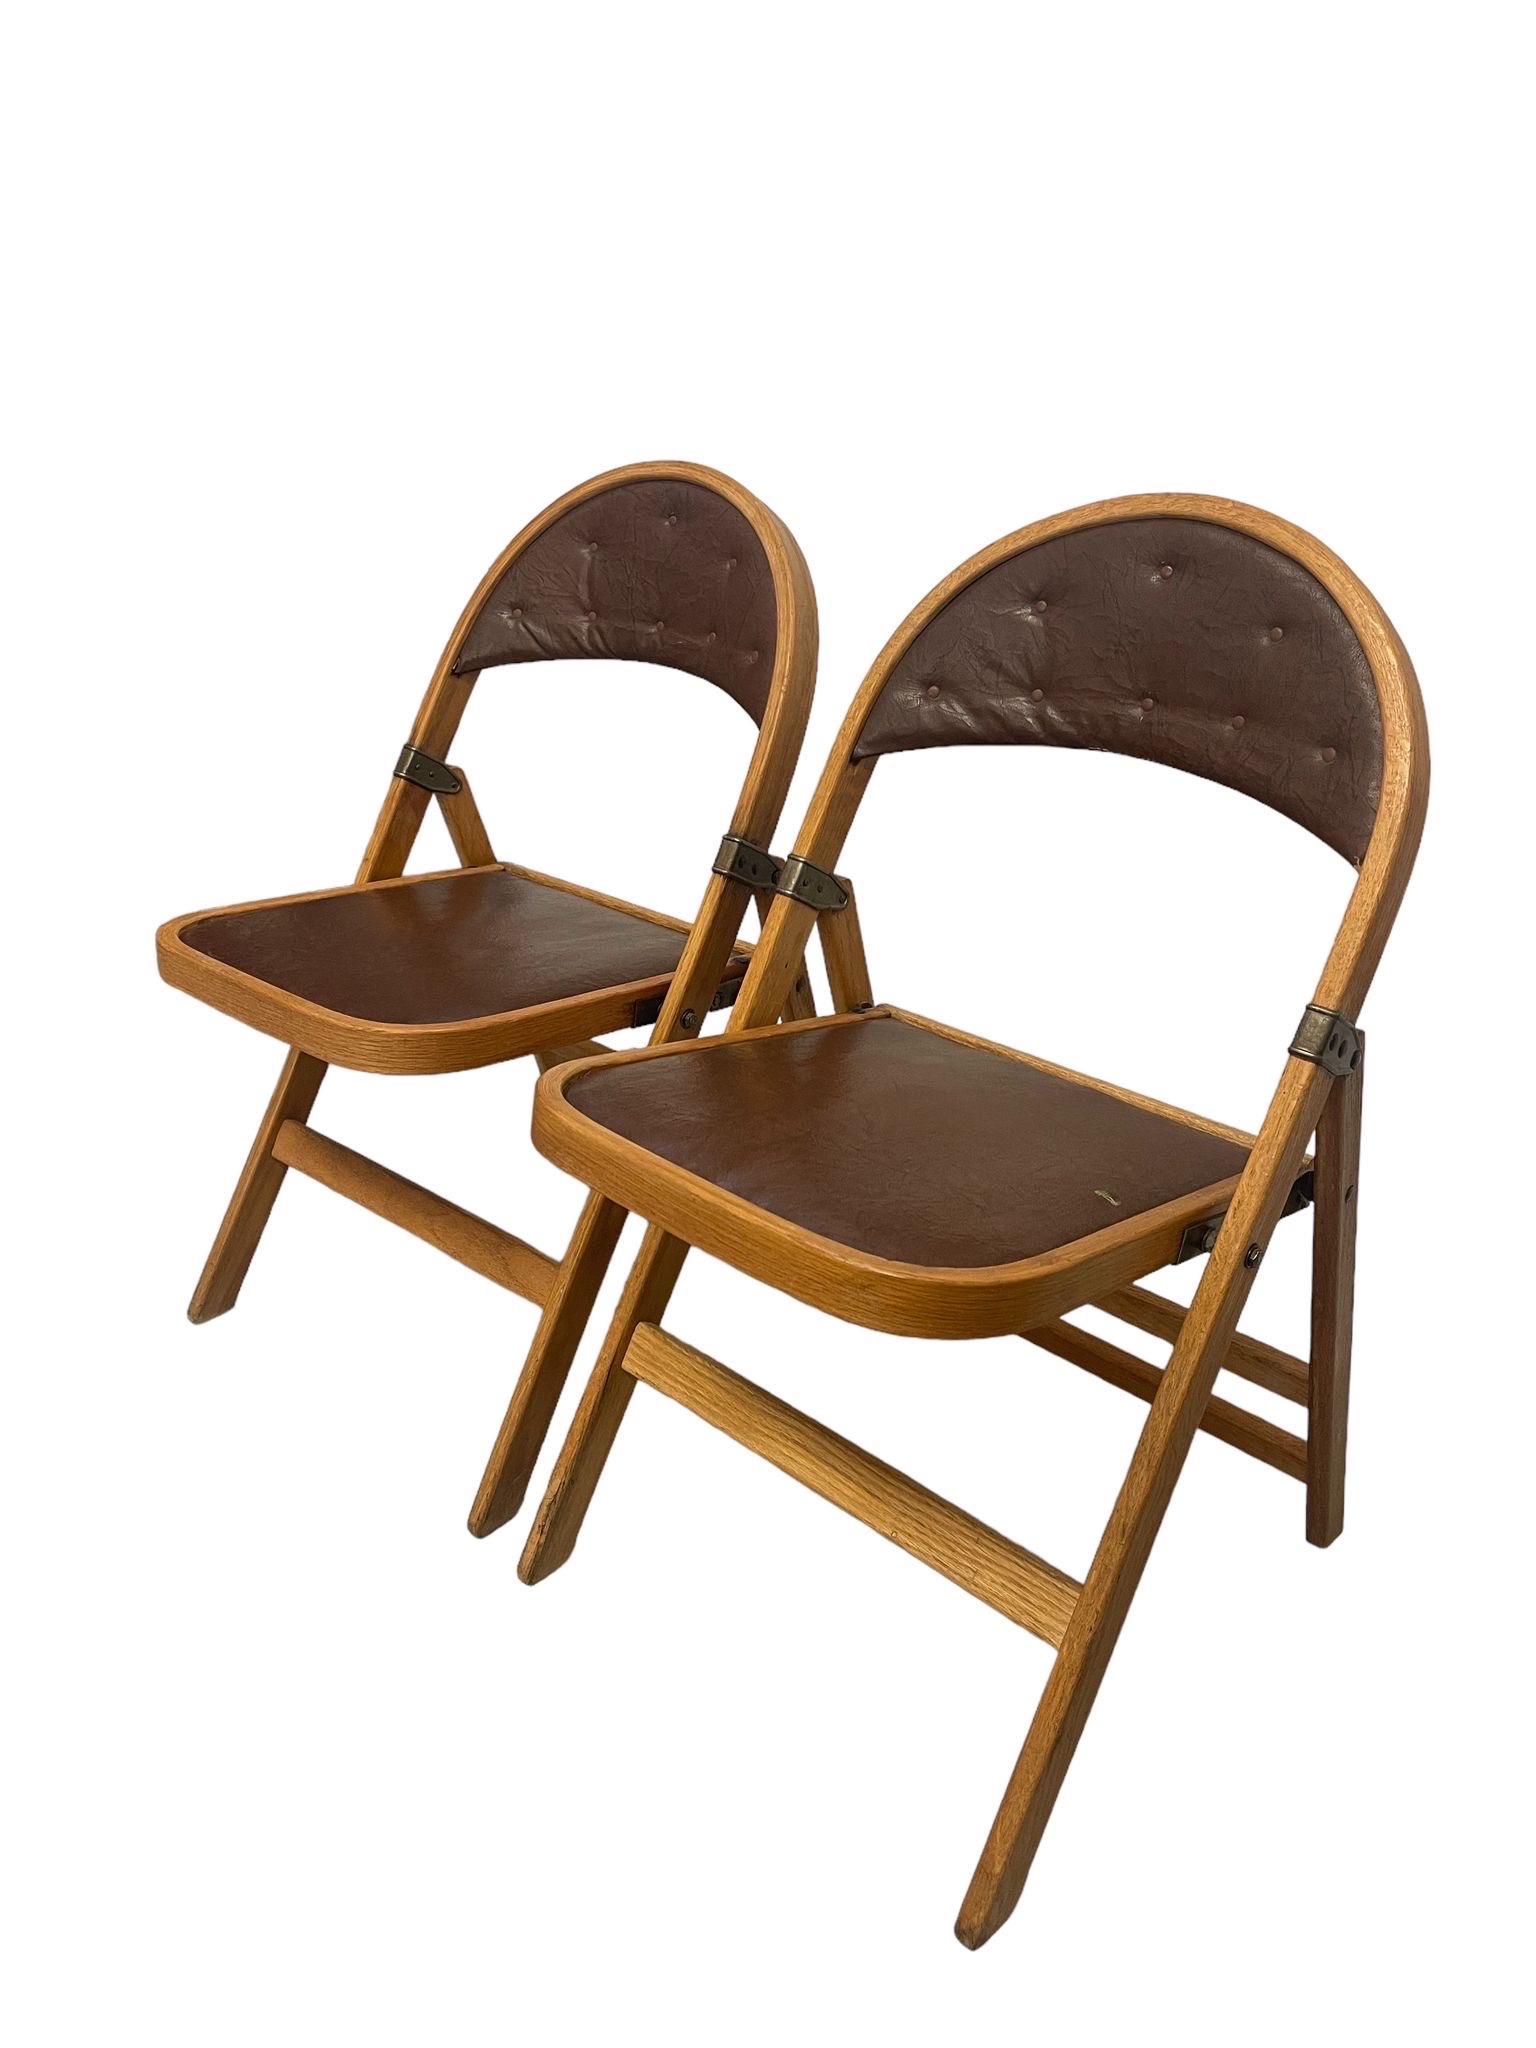 vintage clarin folding chairs